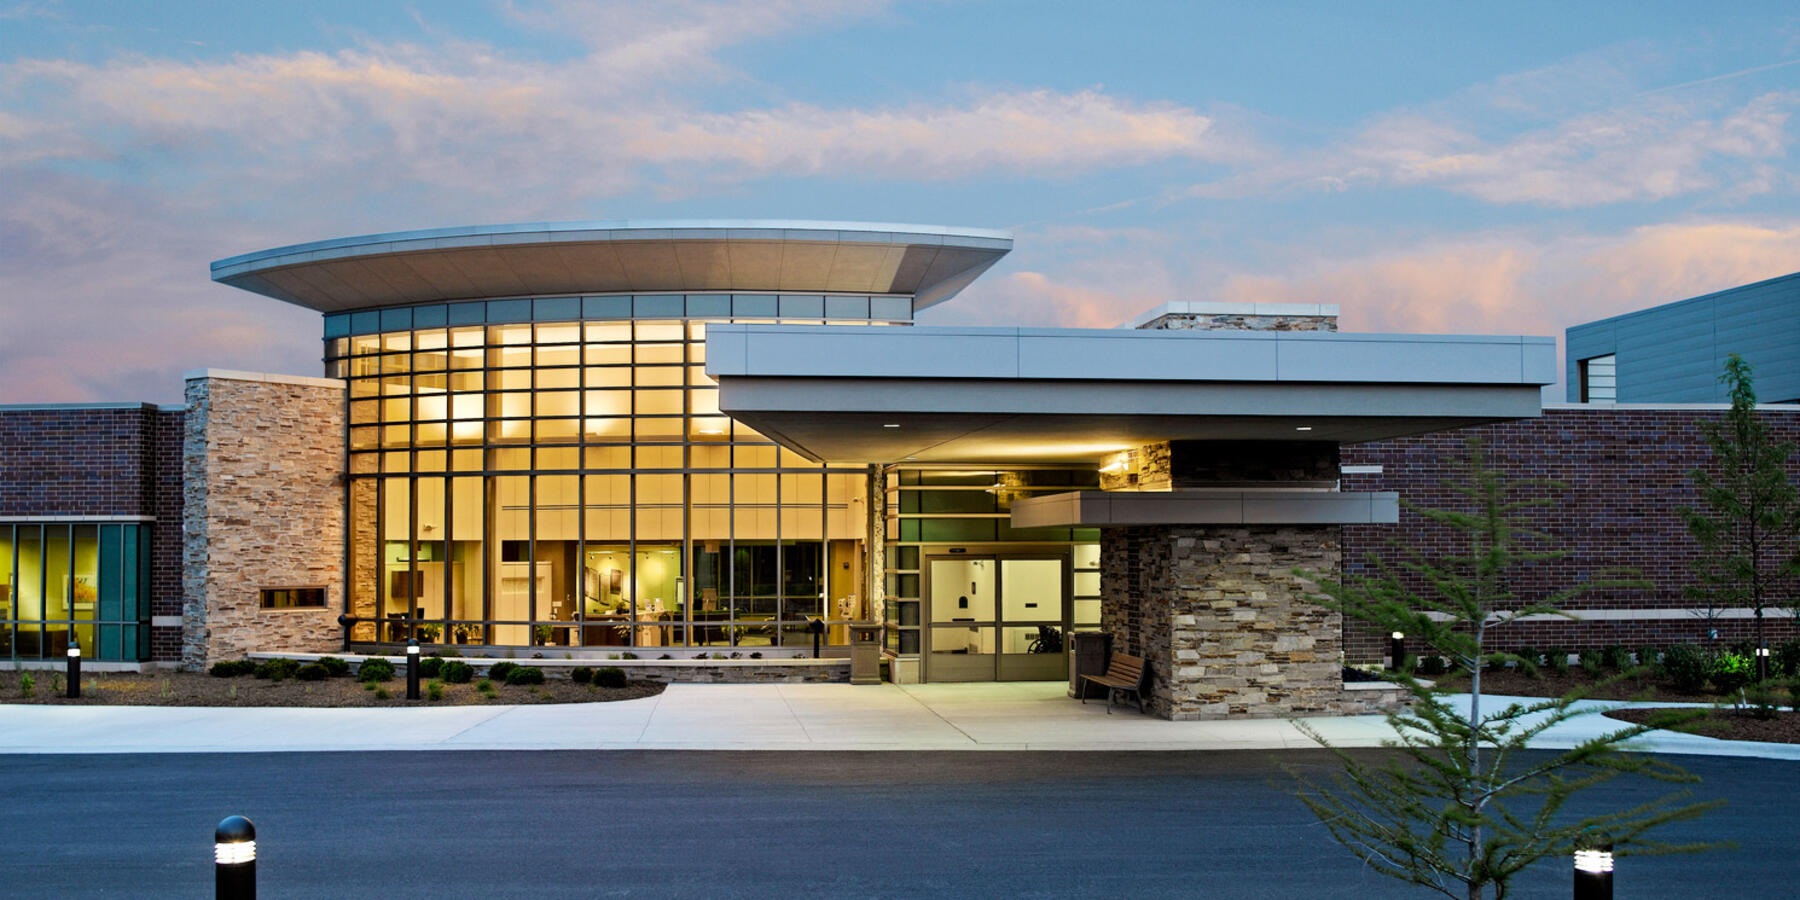 Healthcare Construction Solutions - Kishwaukee Cancer Center exterior entrance and driveway